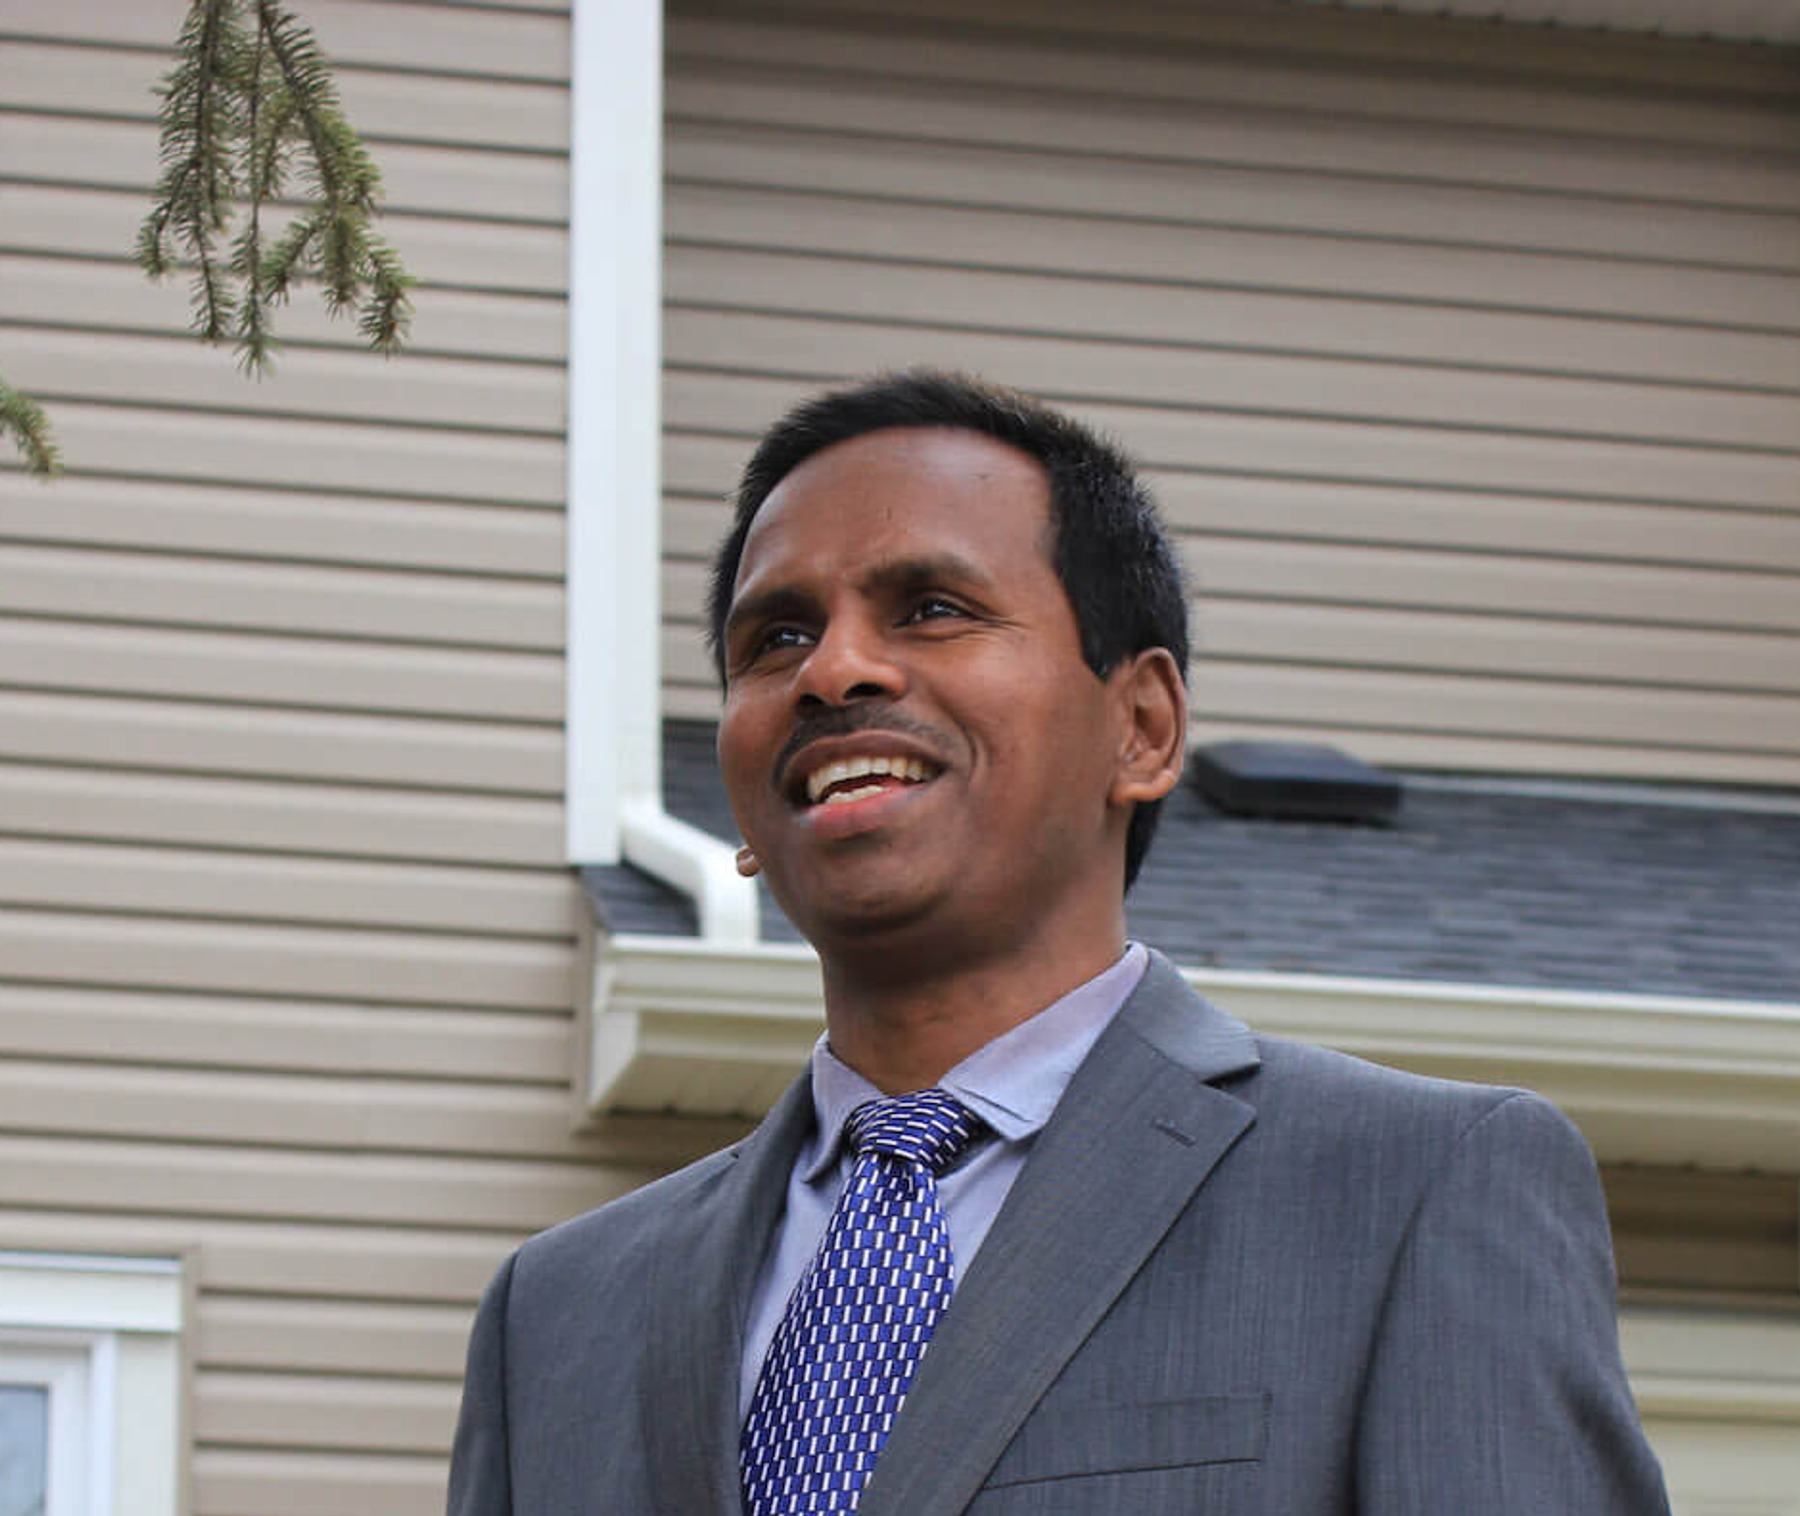 A man in a grey suit and blue tie poses for a photo in front of a brown building.